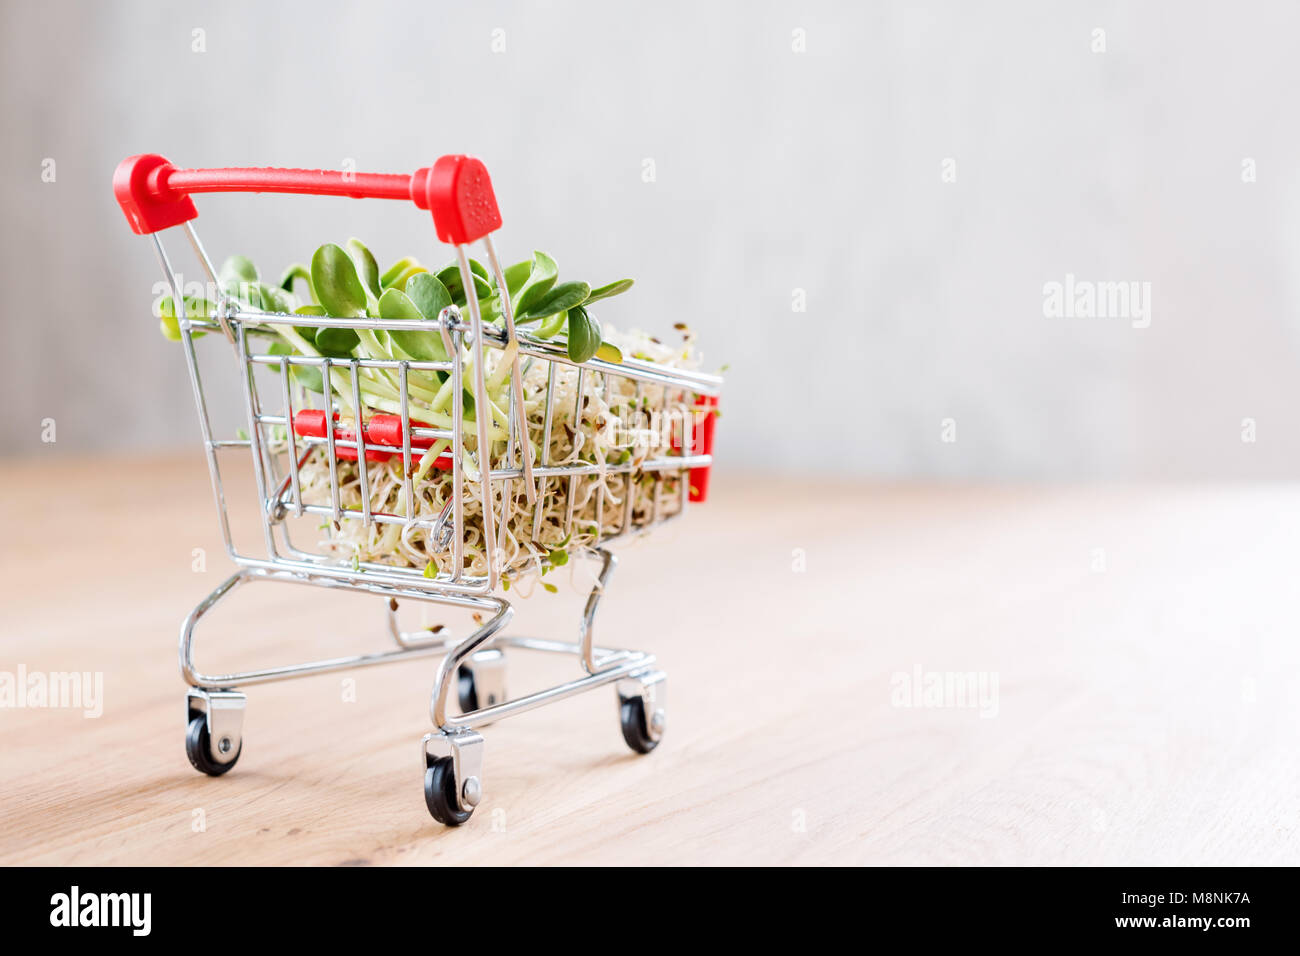 Micro greens in shopping cart on wooden background. Different types of microgreens for sale. Healthy eating concept of fresh garden produce organically grown, symbol of health. Vitamins from nature. Stock Photo